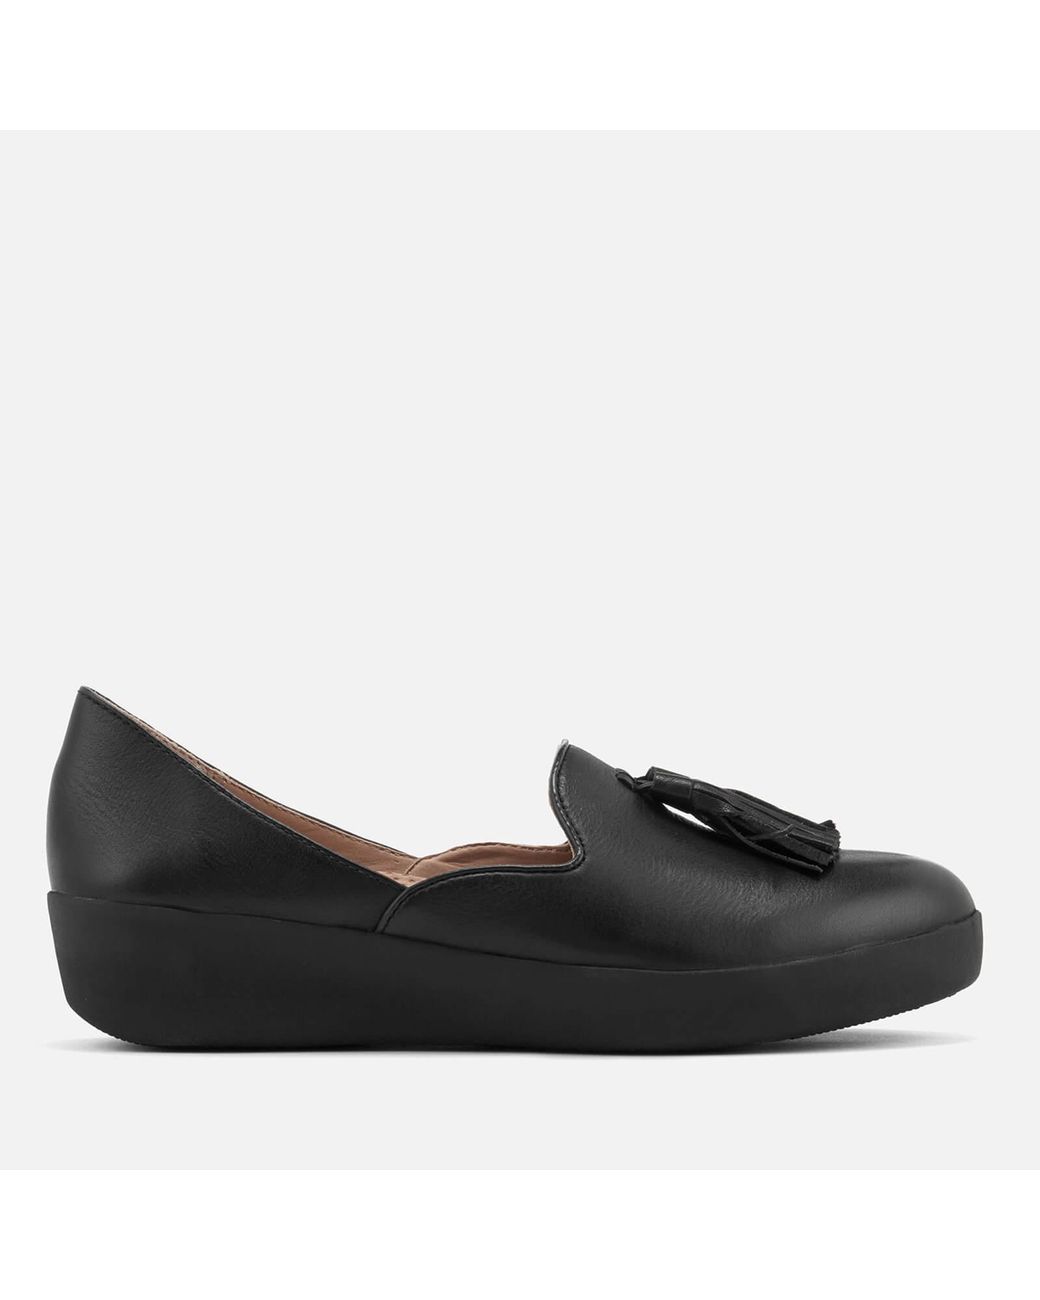 Fitflop Tassel Superskate D'orsay Loafers in Black | Lyst Canada